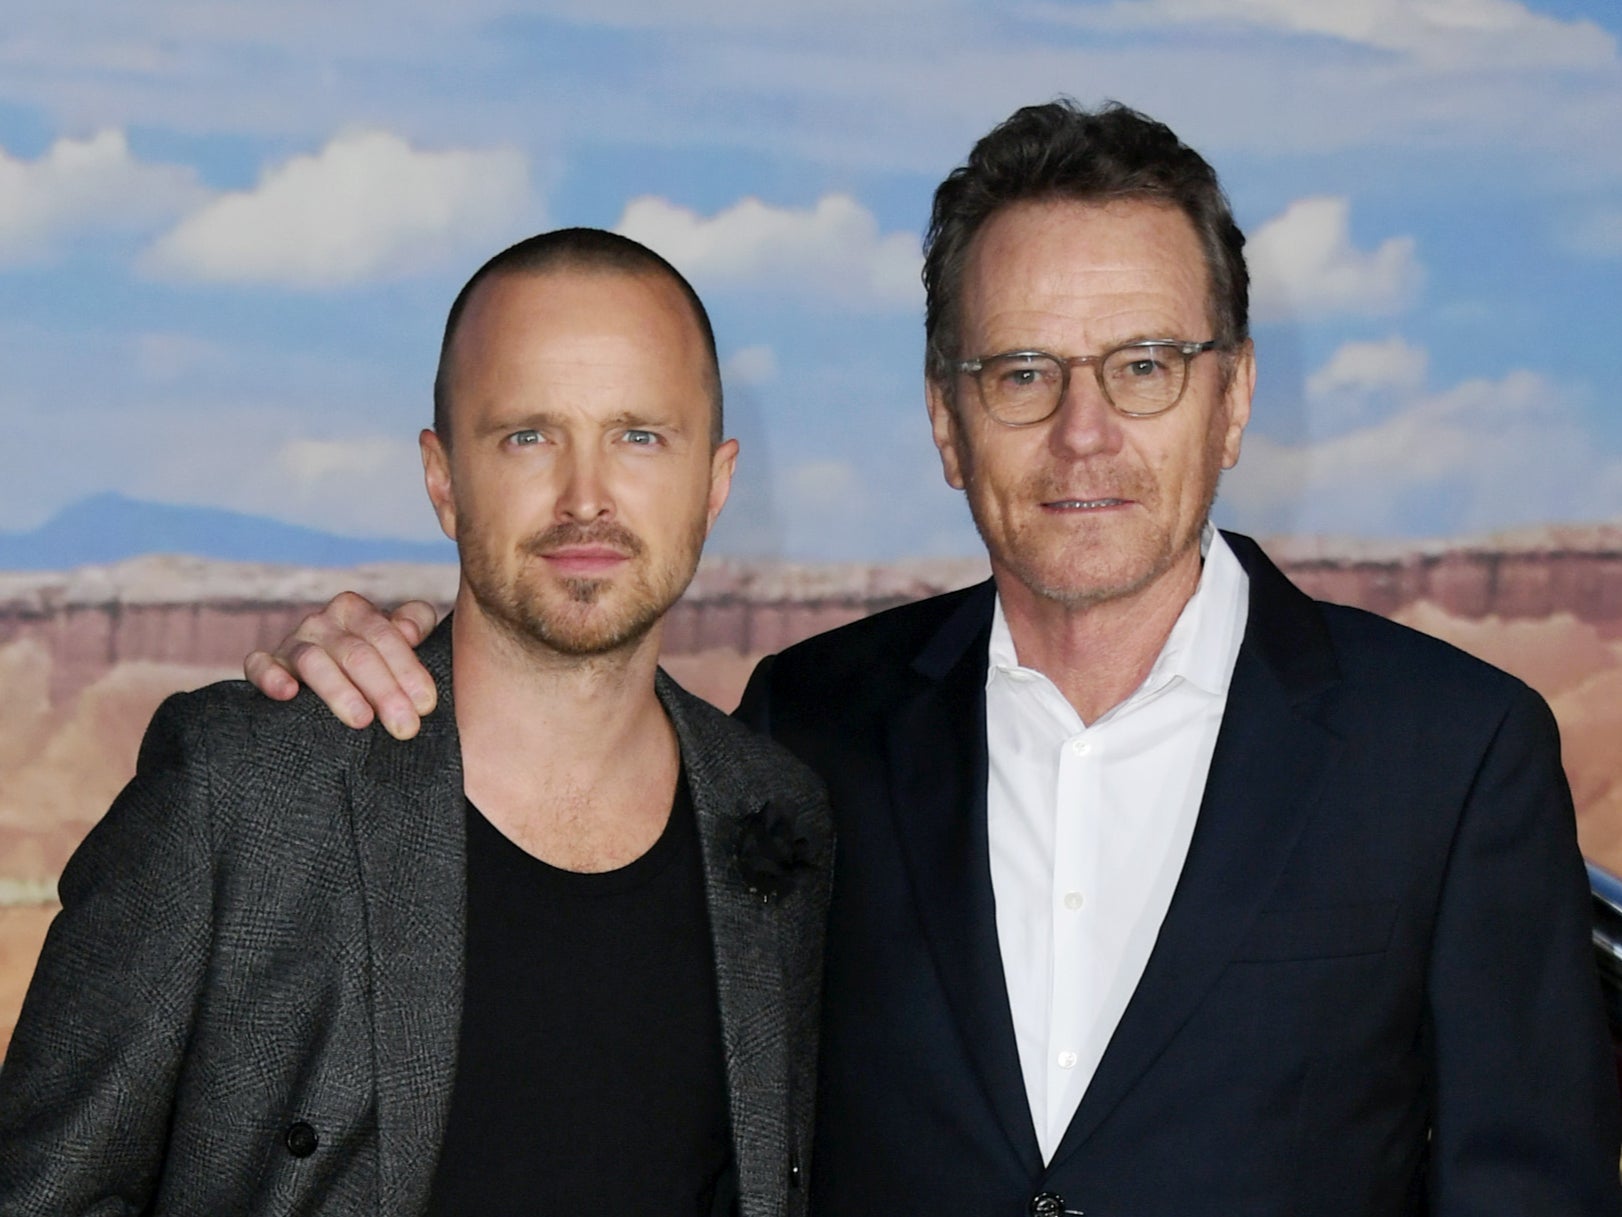 Aaron Paul and Bryan Cranston at the premiere of a spin-off film of ‘Breaking Bad’ called ‘El Camino: A Breaking Bad Movie'